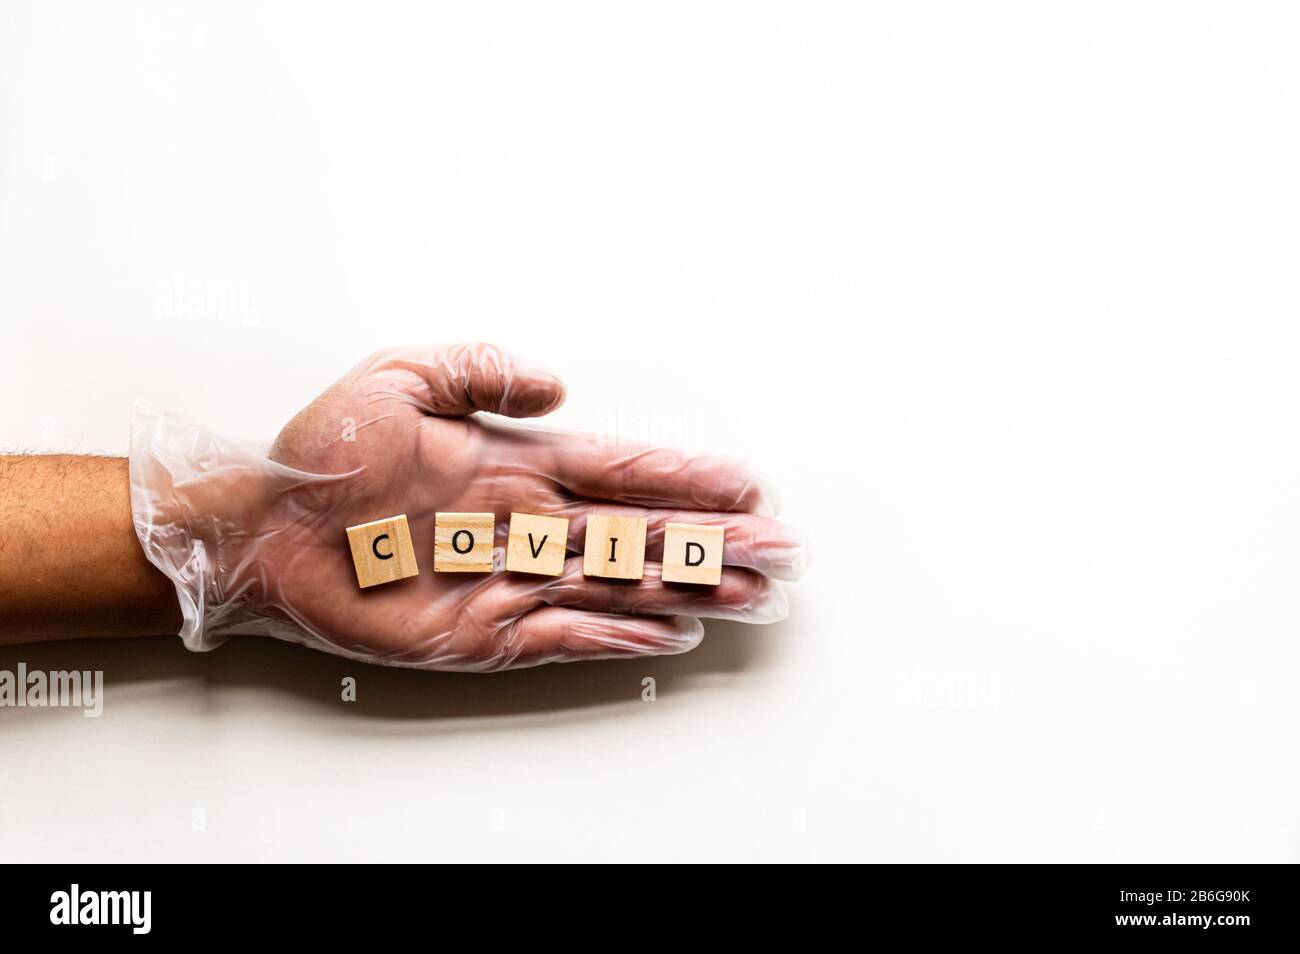 An isolated left hand wears a latex glove and displays the message 'COVID'. Stock Photo